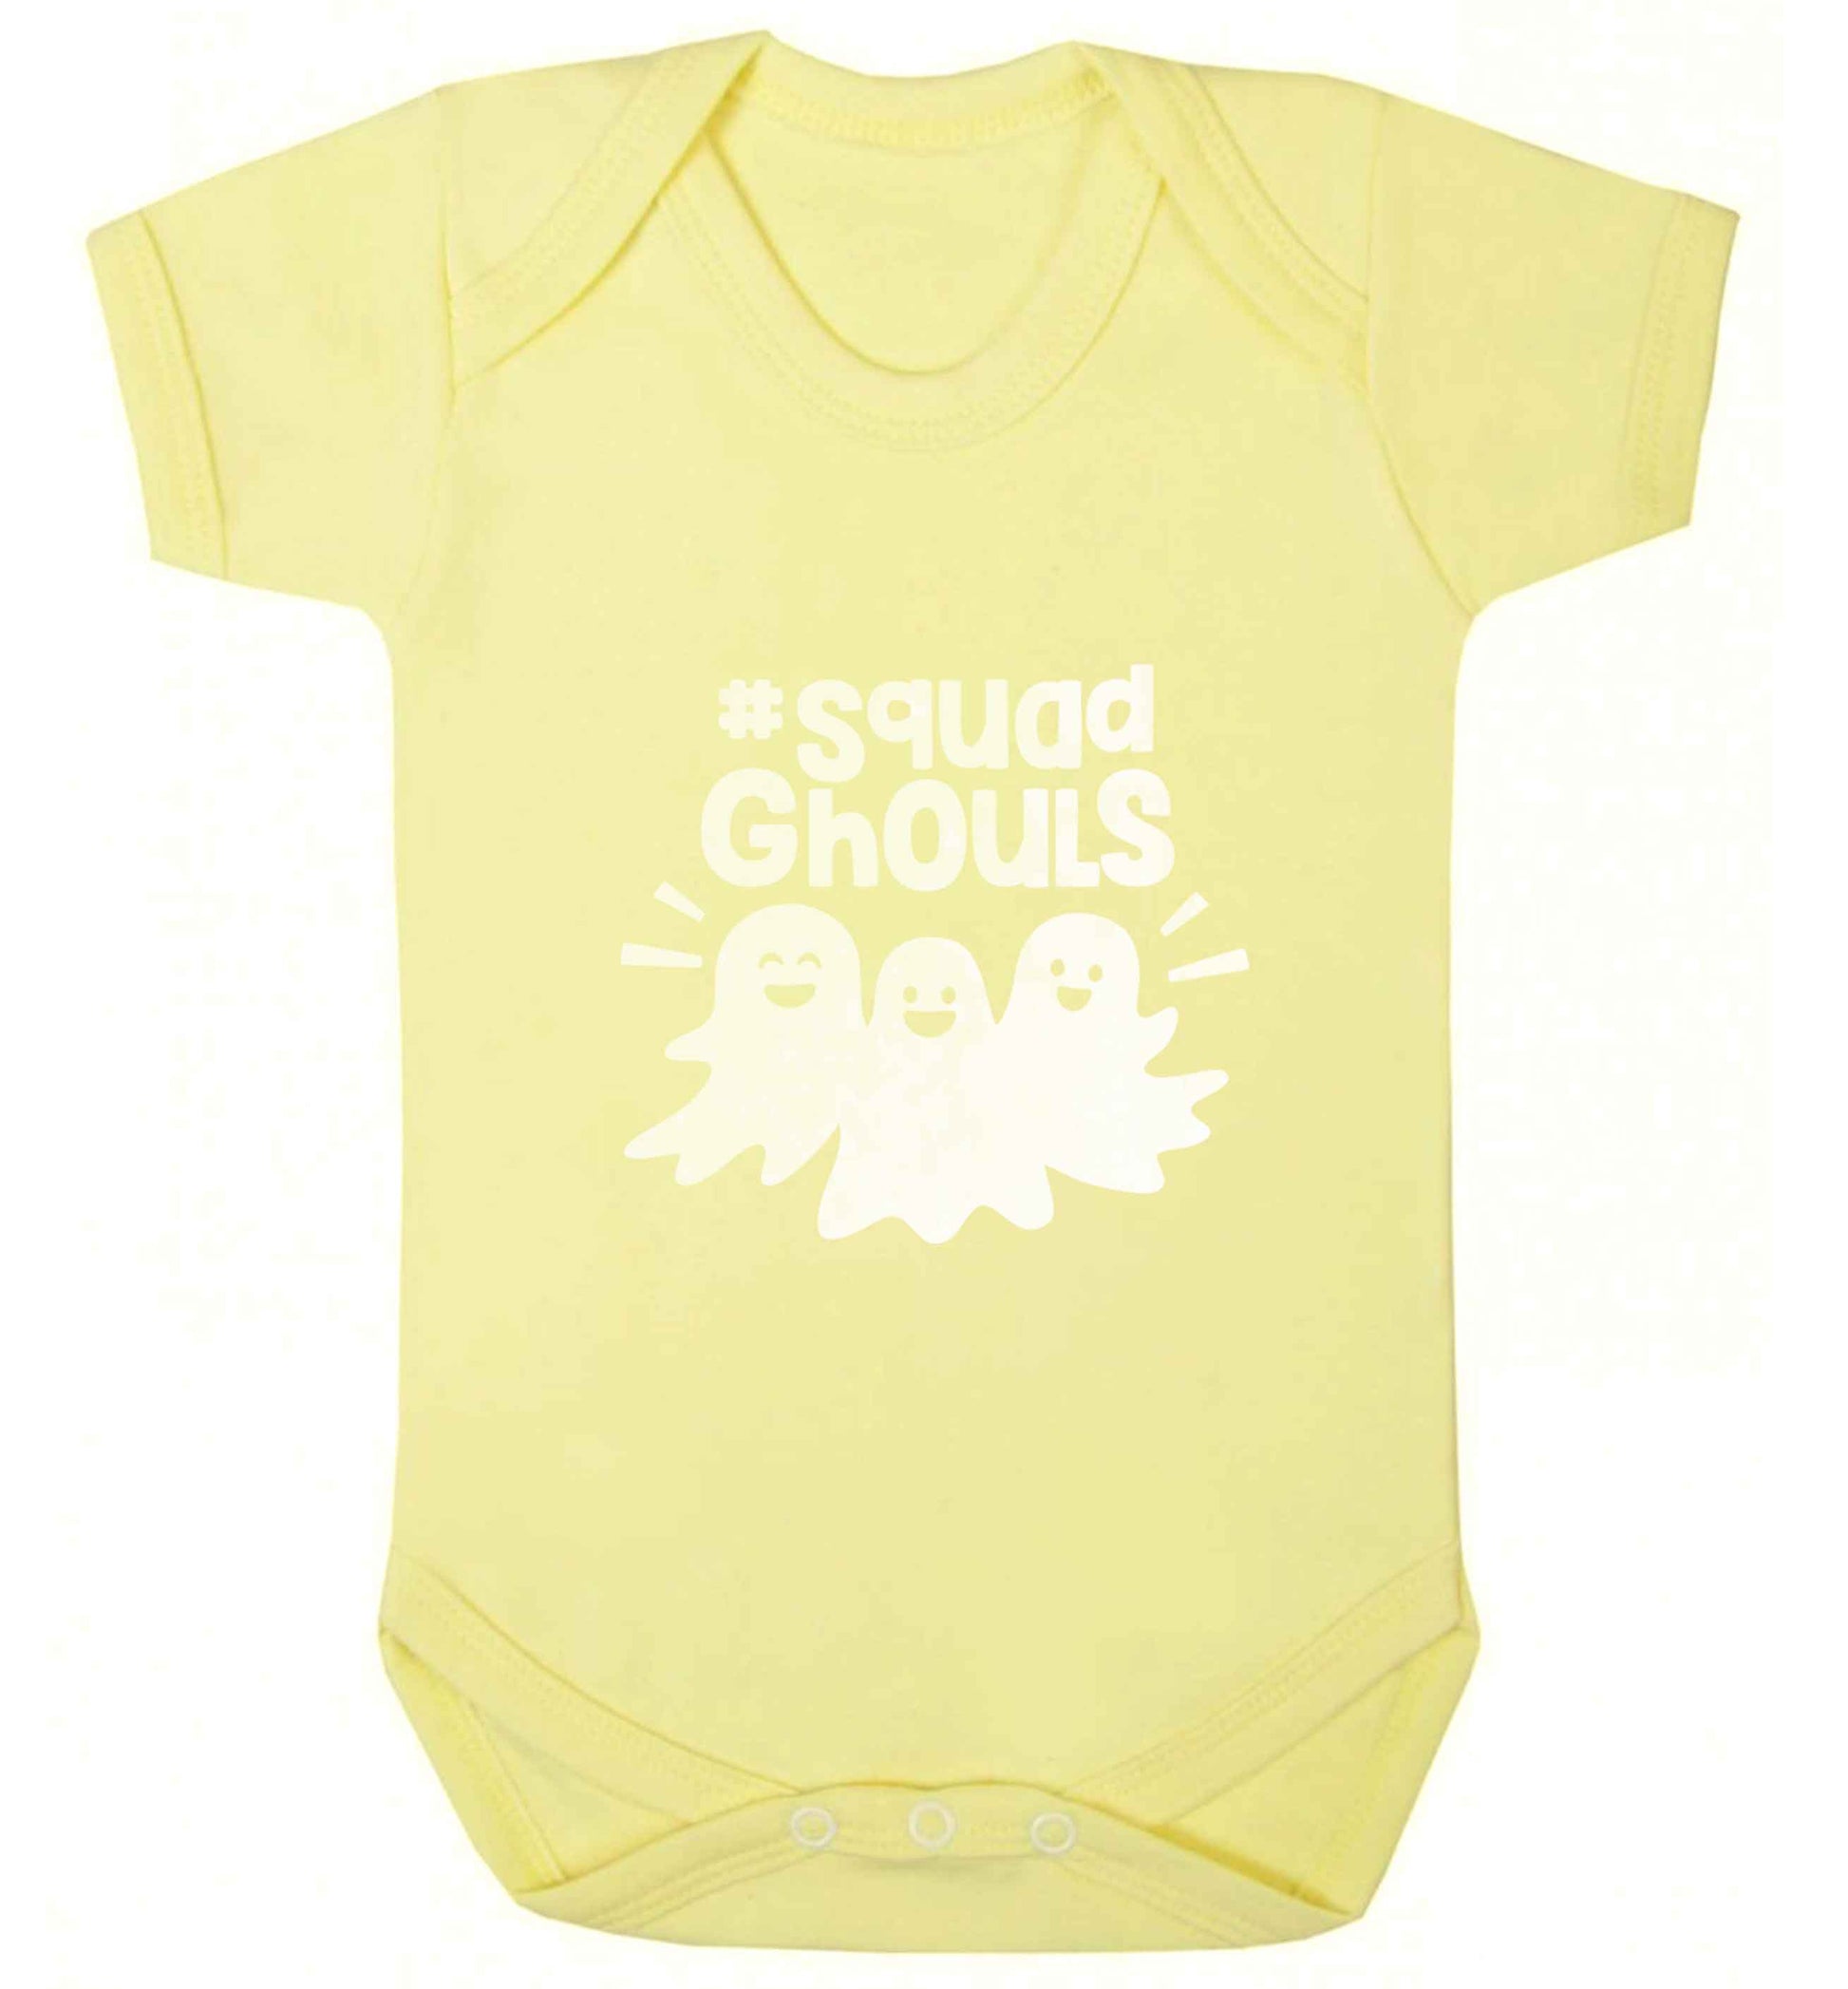 Squad ghouls Kit baby vest pale yellow 18-24 months